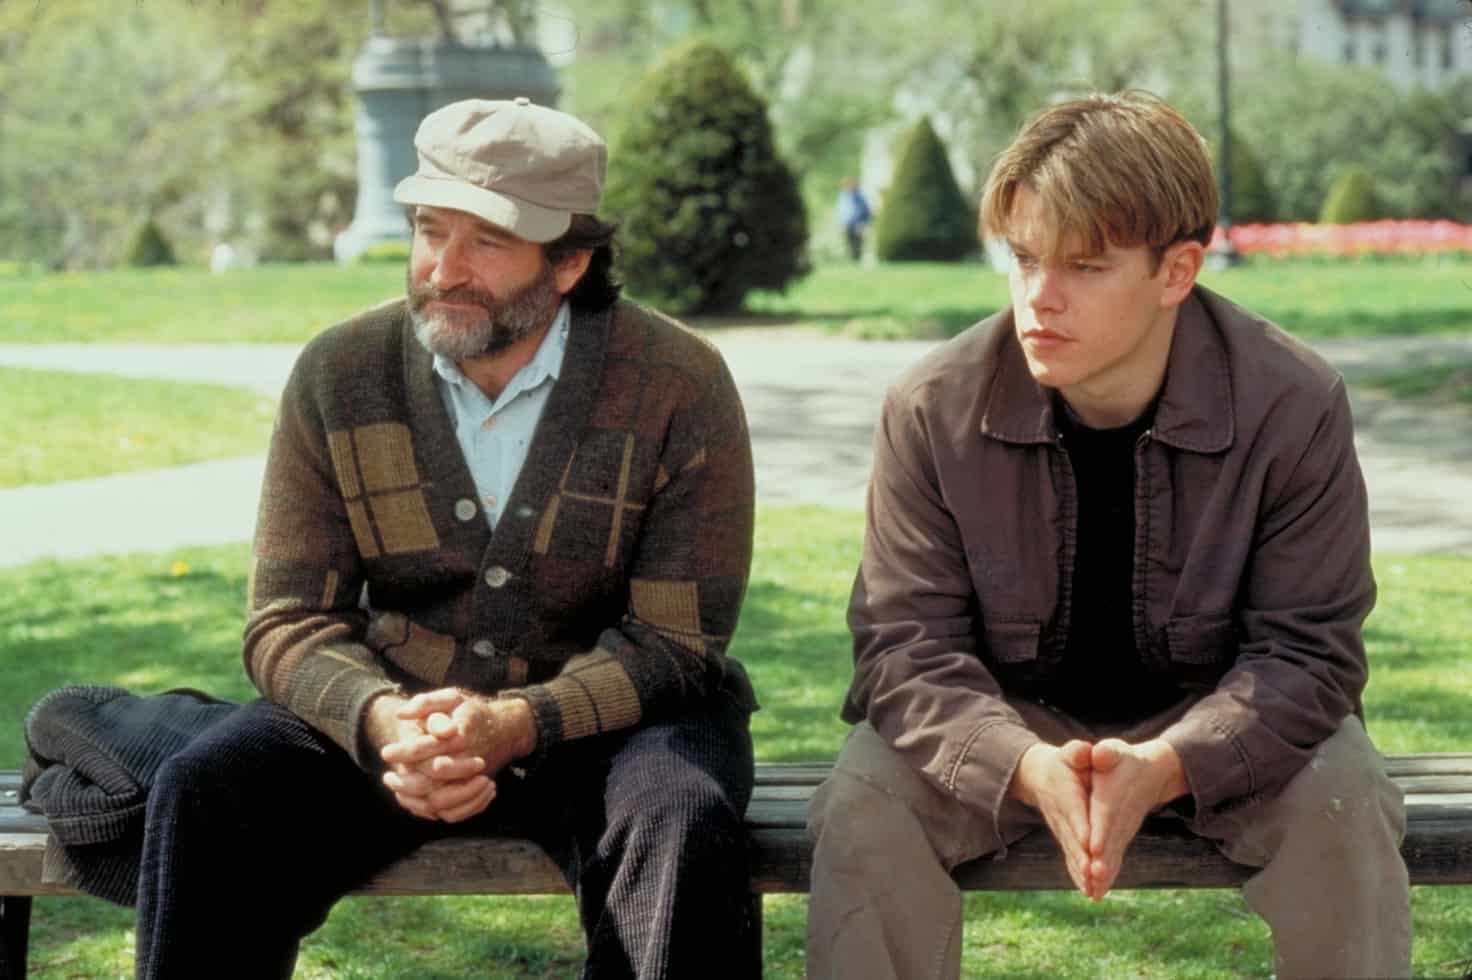 Sean and Will sitting on a park bench in the movie Good Will Hunting